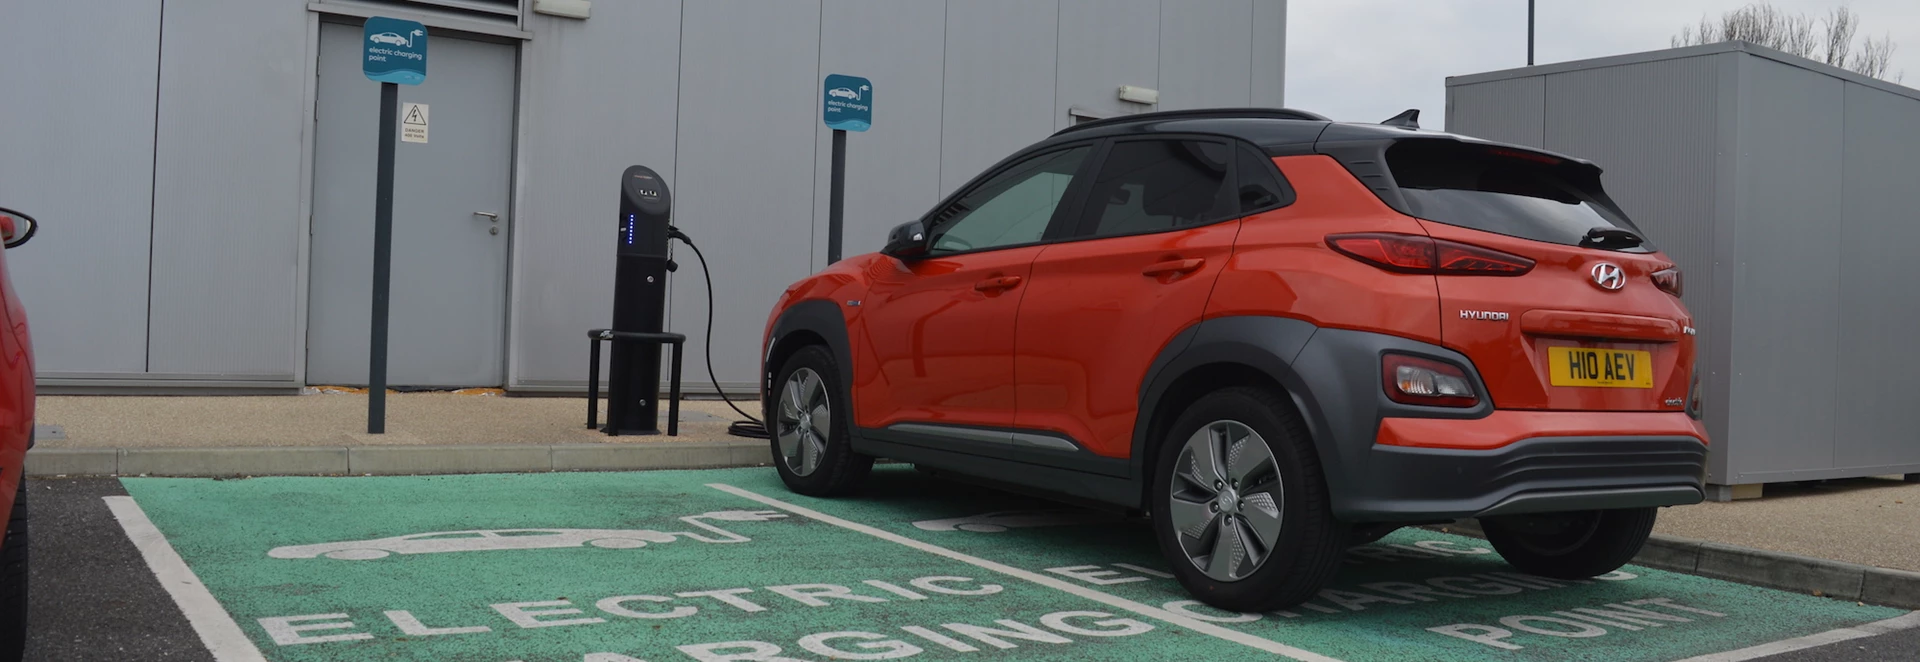 UK’s best and worst cities for EV charging revealed